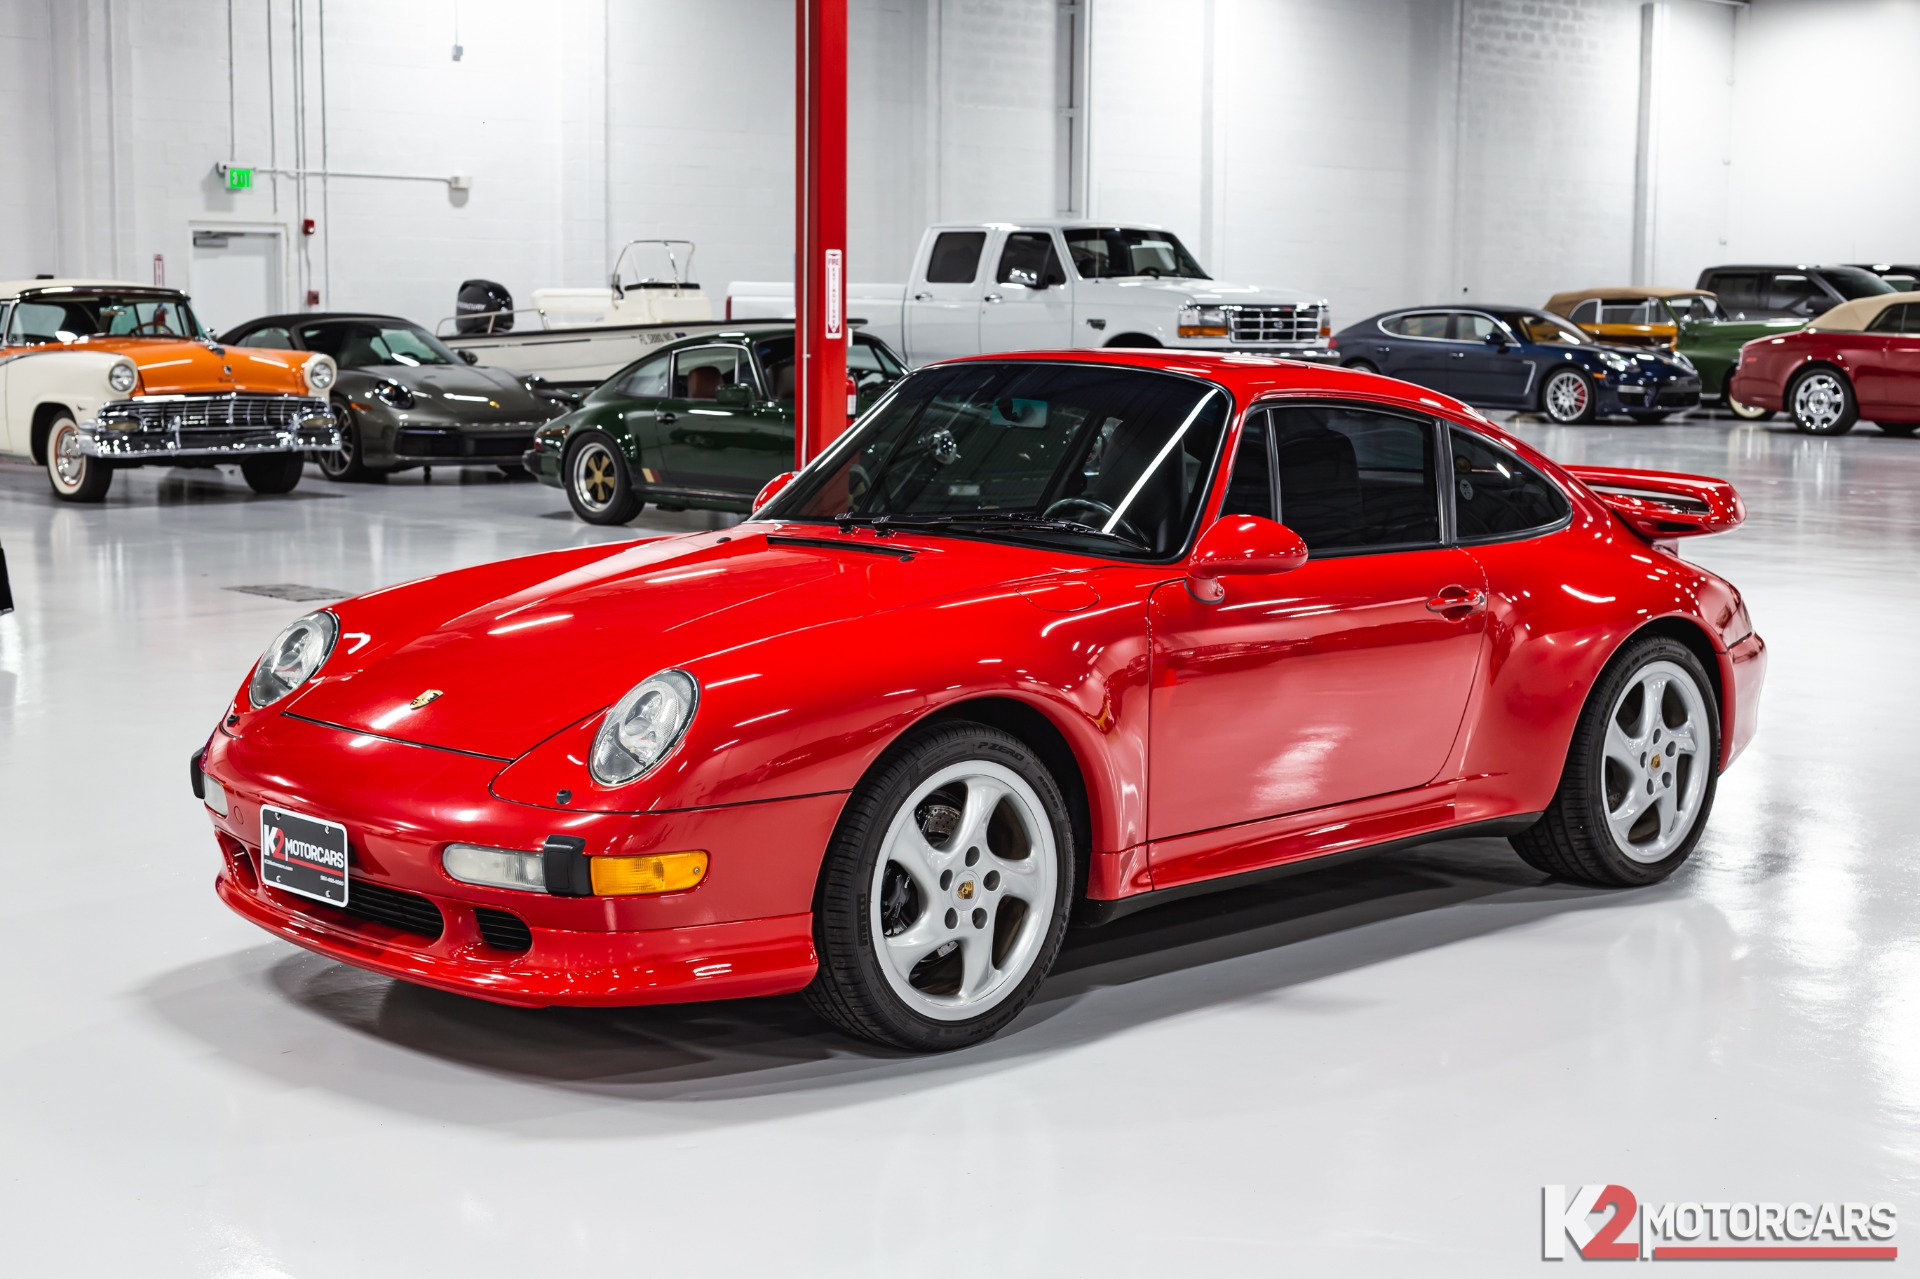 halsband nevel Trouw Used 1997 Porsche 911 Carrera 2S For Sale (Sold) | K2 Motorcars Stock #00003